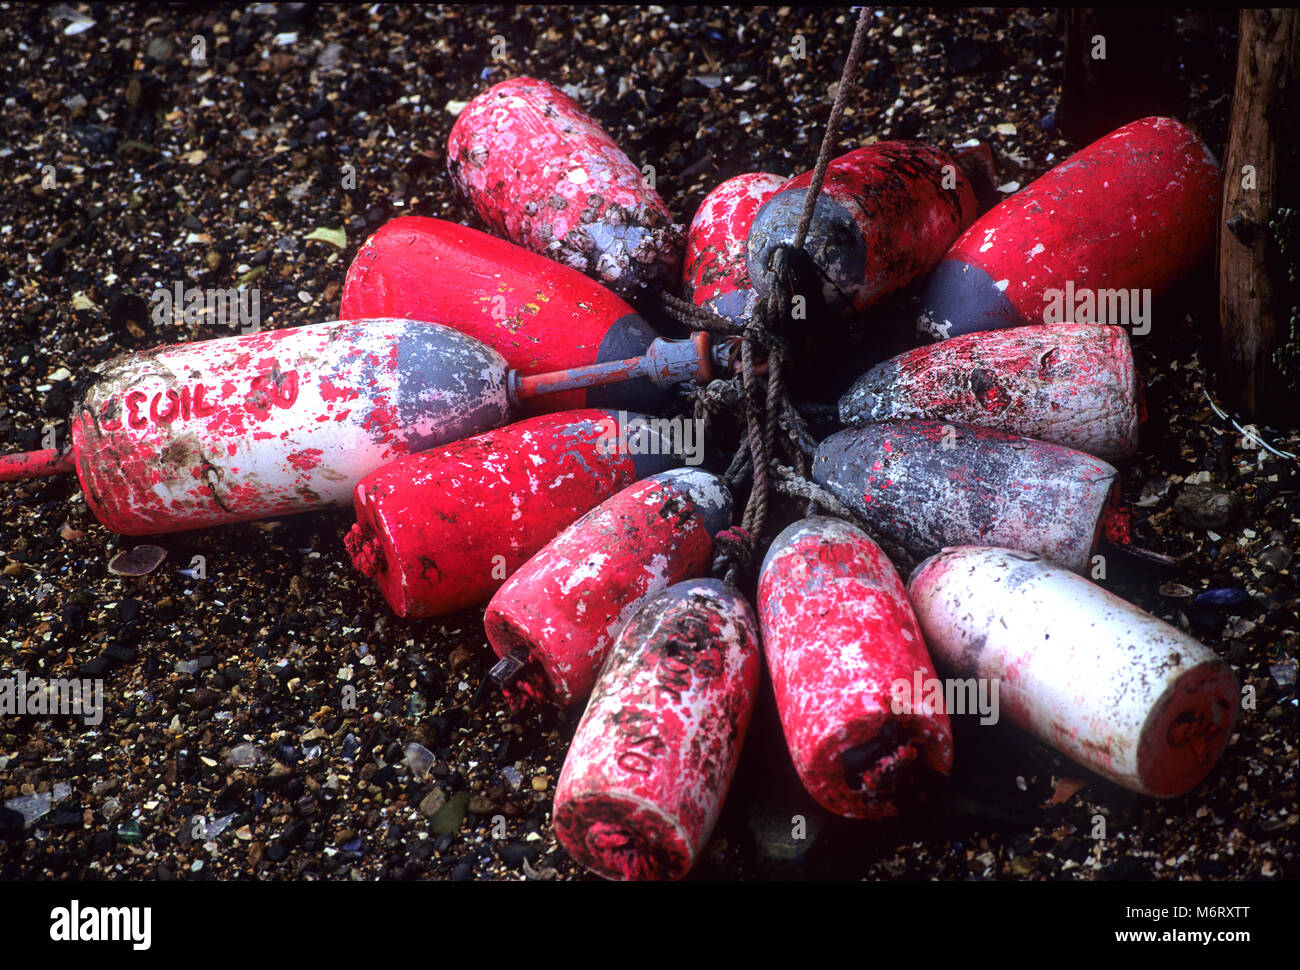 Lobster Buoys in the mud in a Maine haarbor, USA Stock Photo